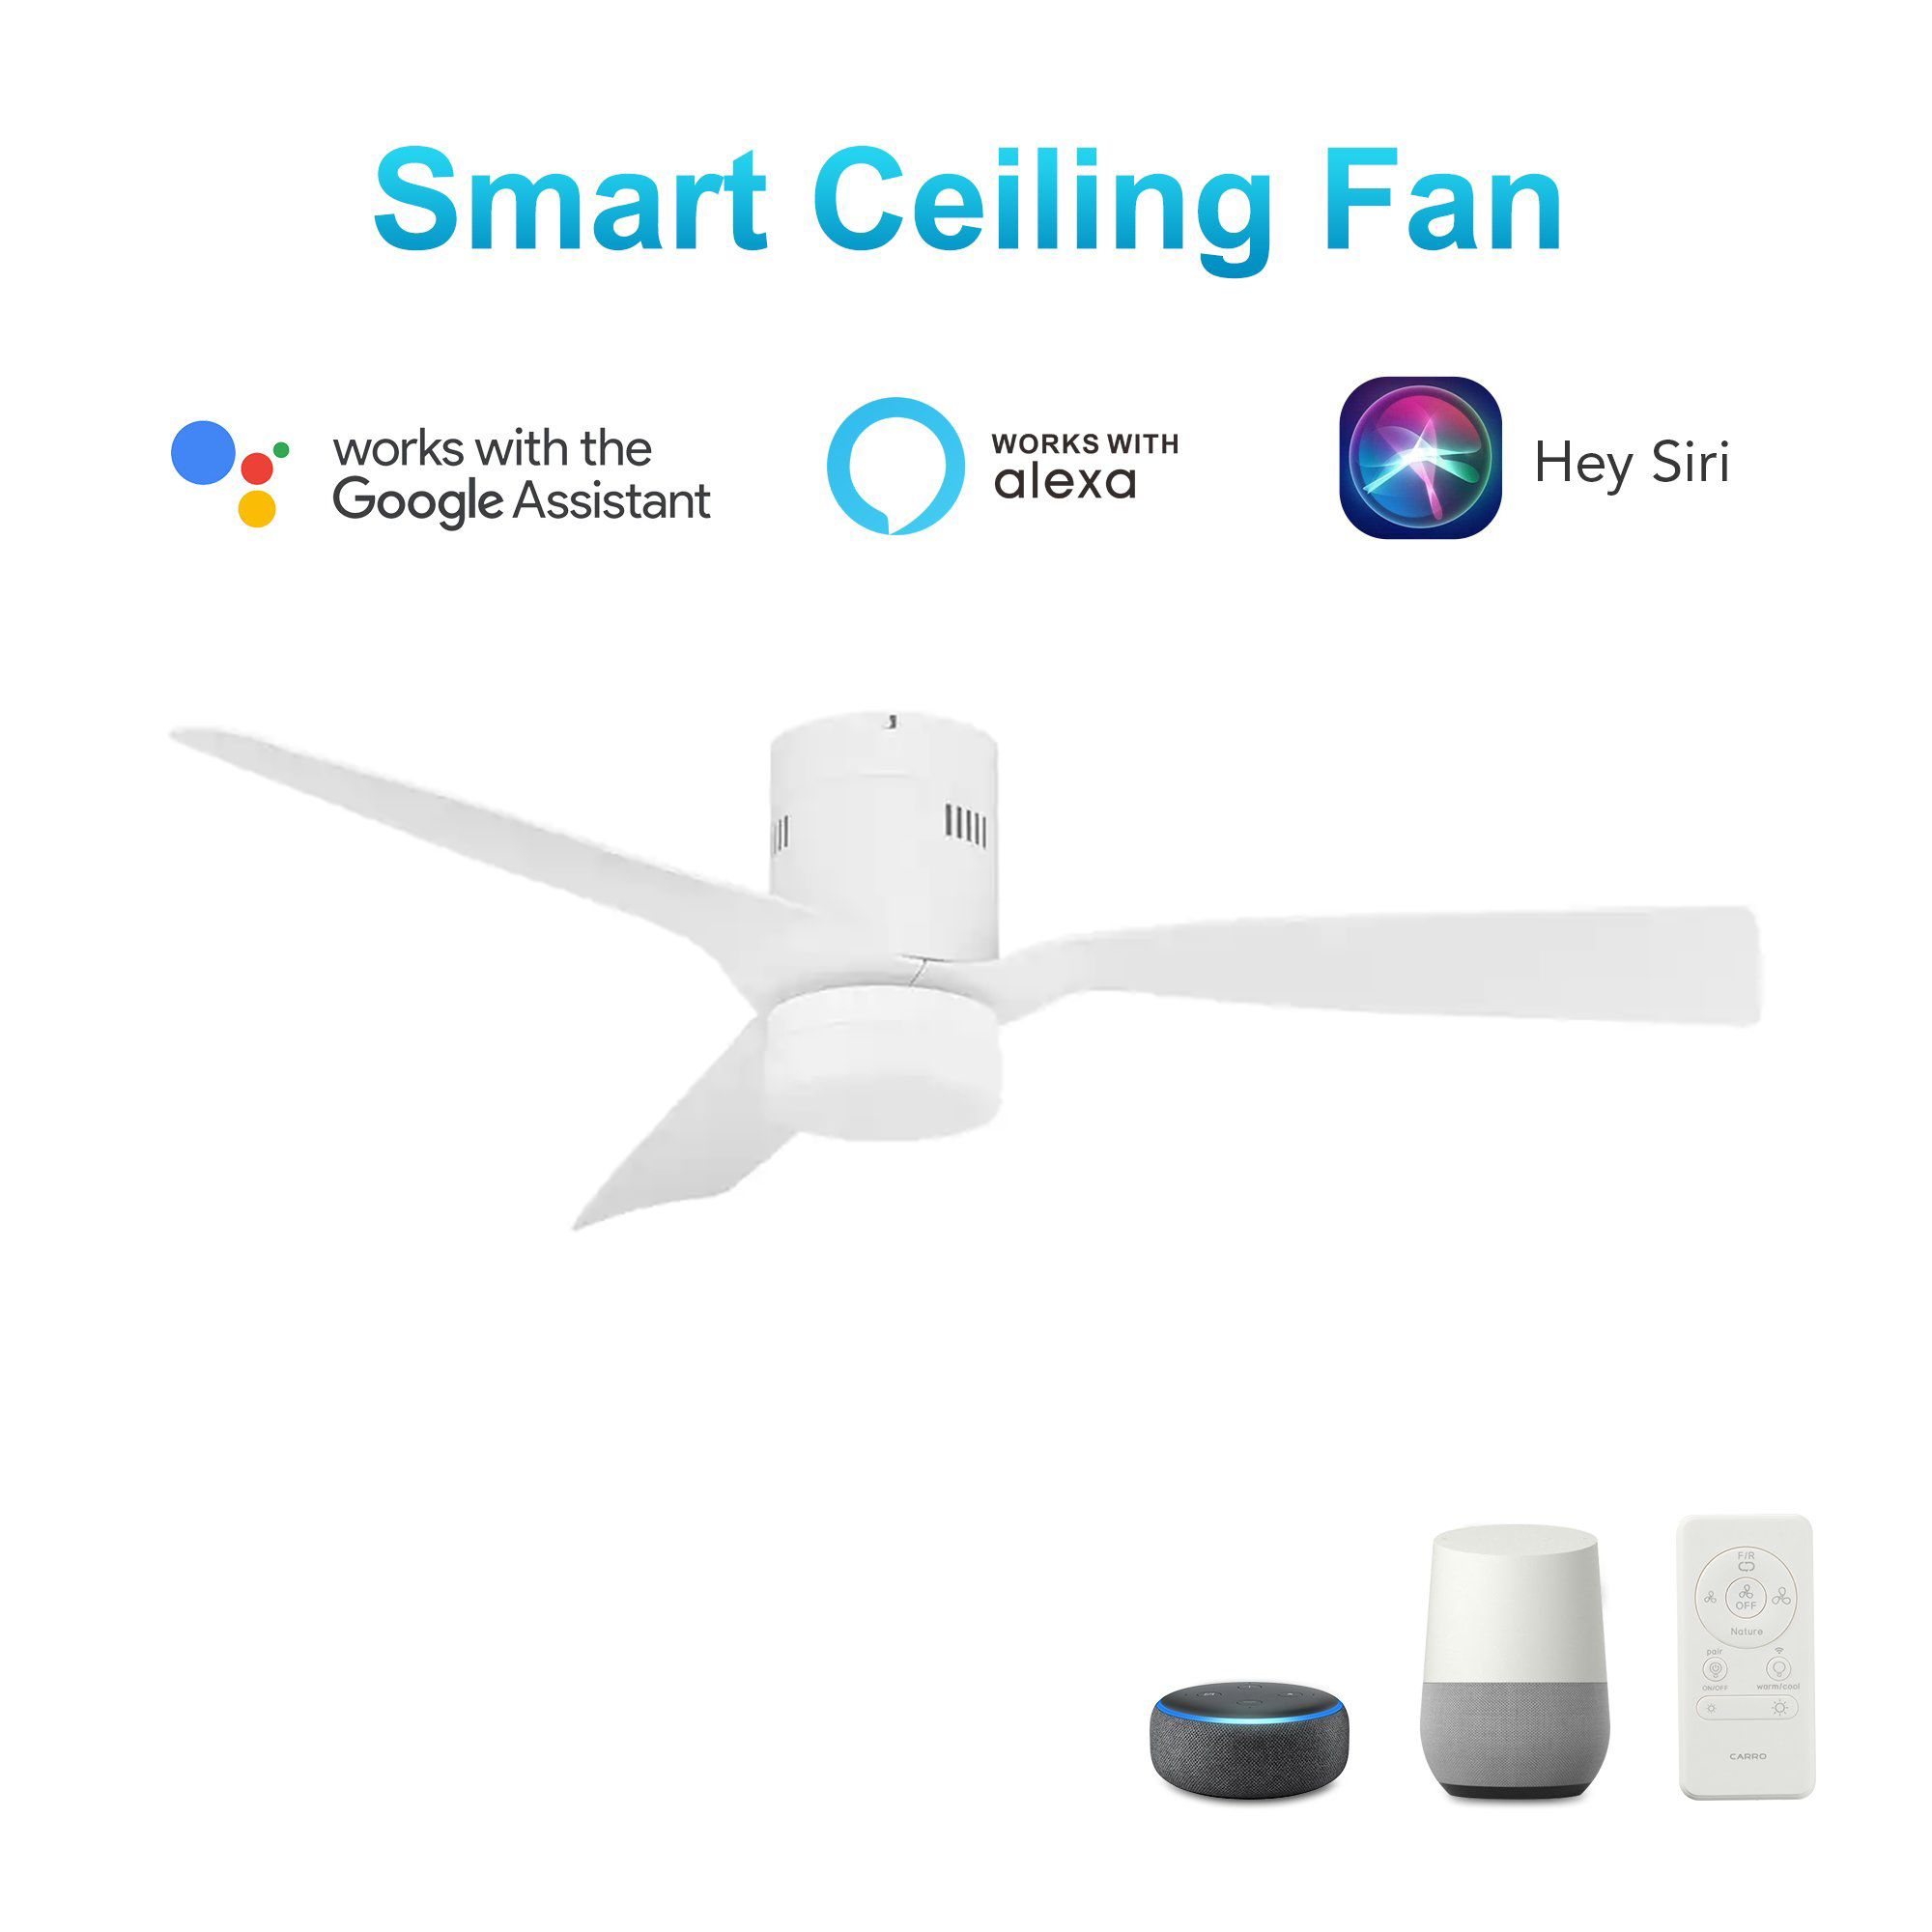 Striver 3 Blade Smart Ceiling Fan with Dimmable LED Light Kit Works with Remote Control, Wi-Fi apps and Voice control via Google Assistant/Alexa/Siri